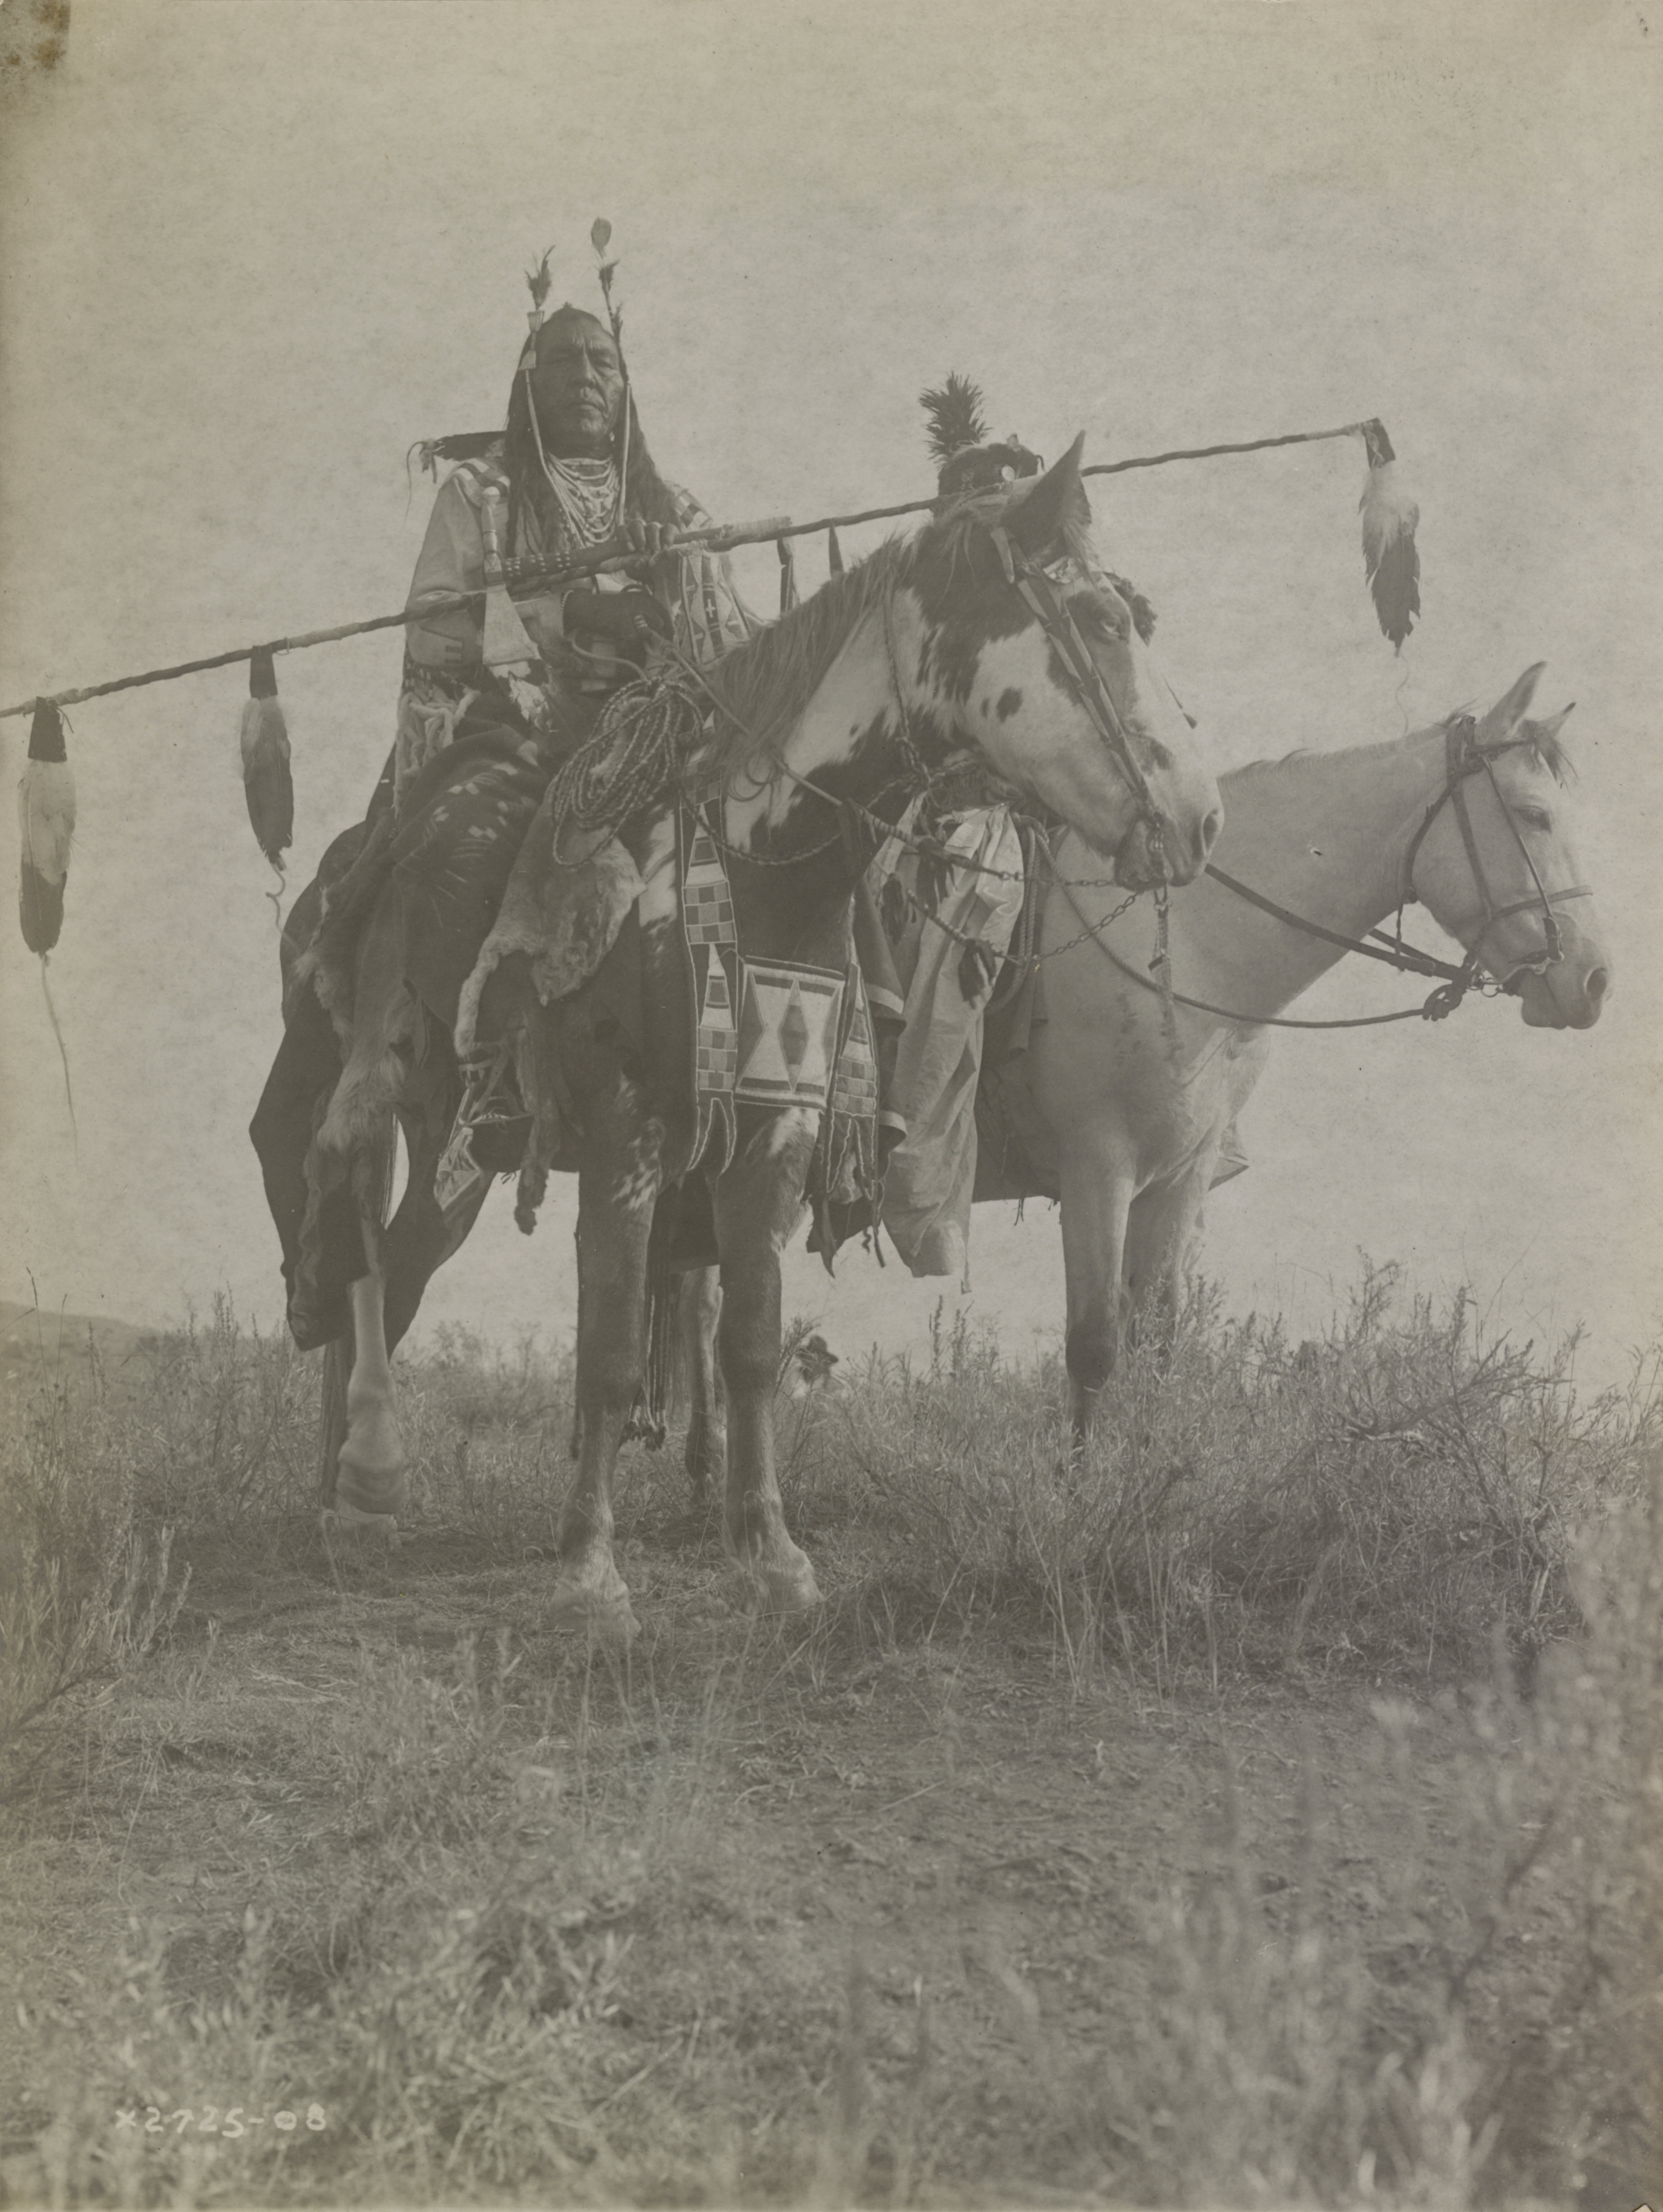 Village criers on horseback, Bird On the Ground and Forked Iron, Crow Americans from Montana, 1908.jpg